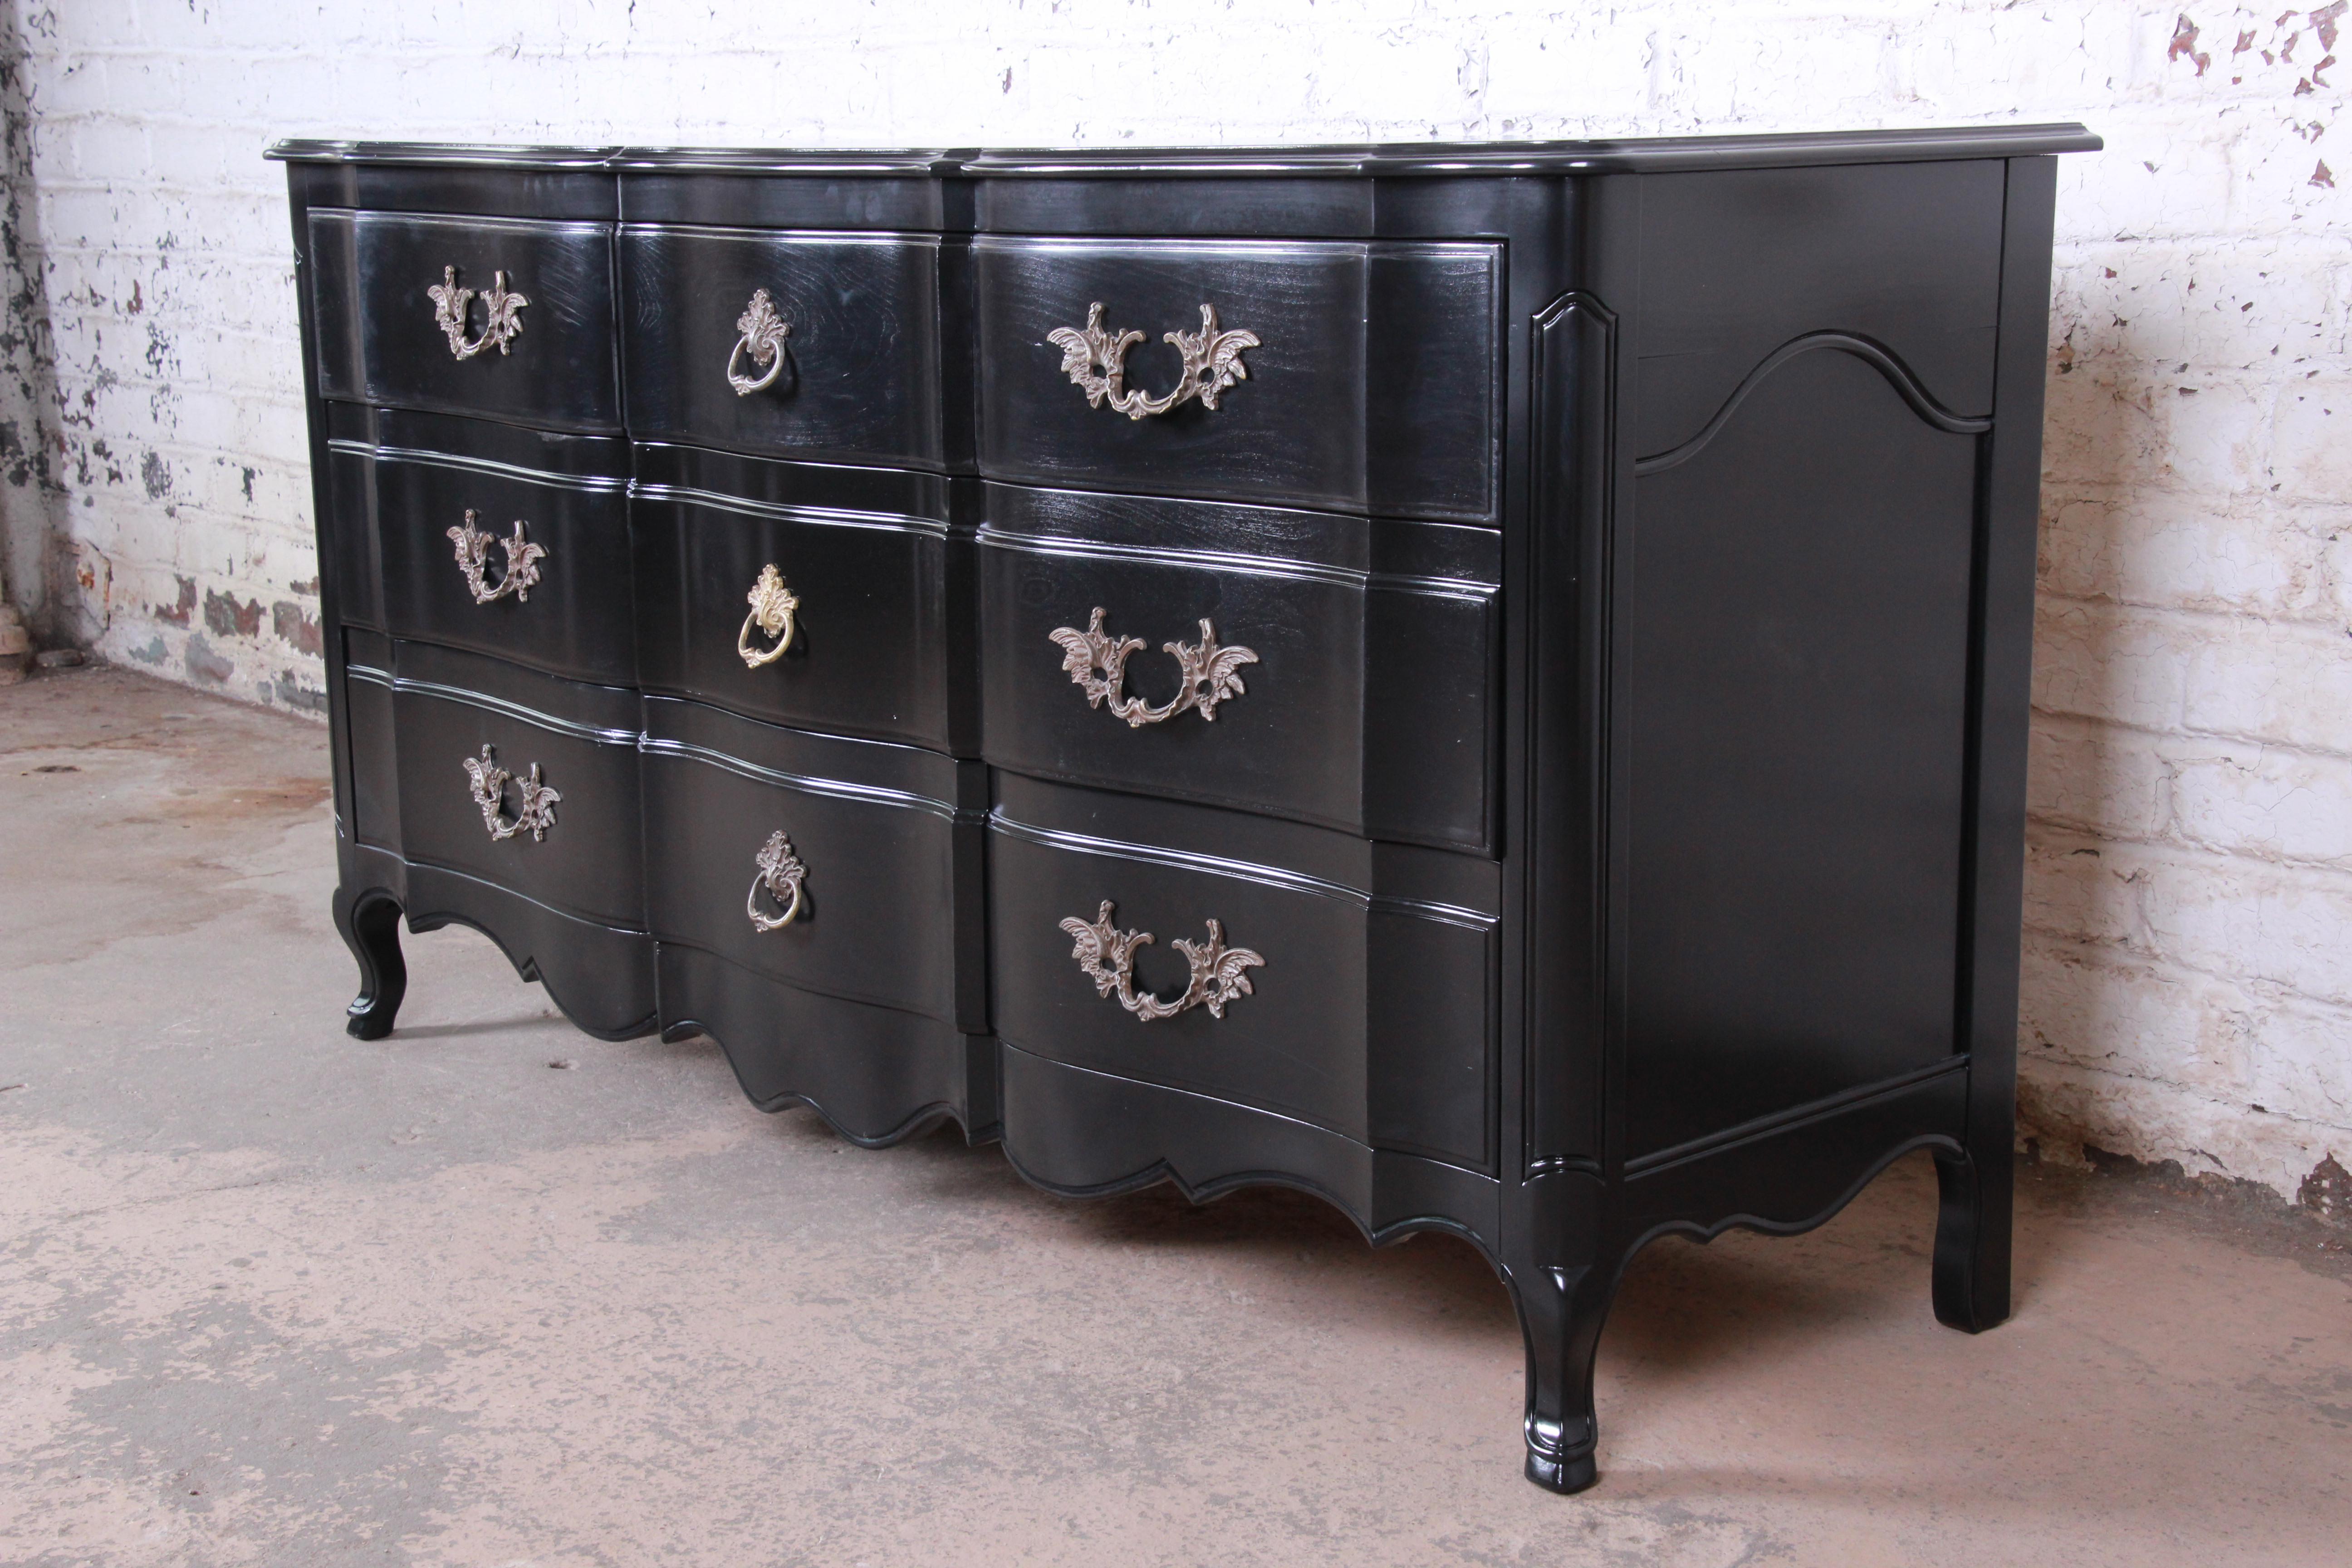 An exceptional French Provincial Louis XV style triple dresser or credenza by John Widdicomb. The dresser features beautiful walnut wood grain with a stunning newly ebonized finish. It has gorgeous carved wood details and original brass French